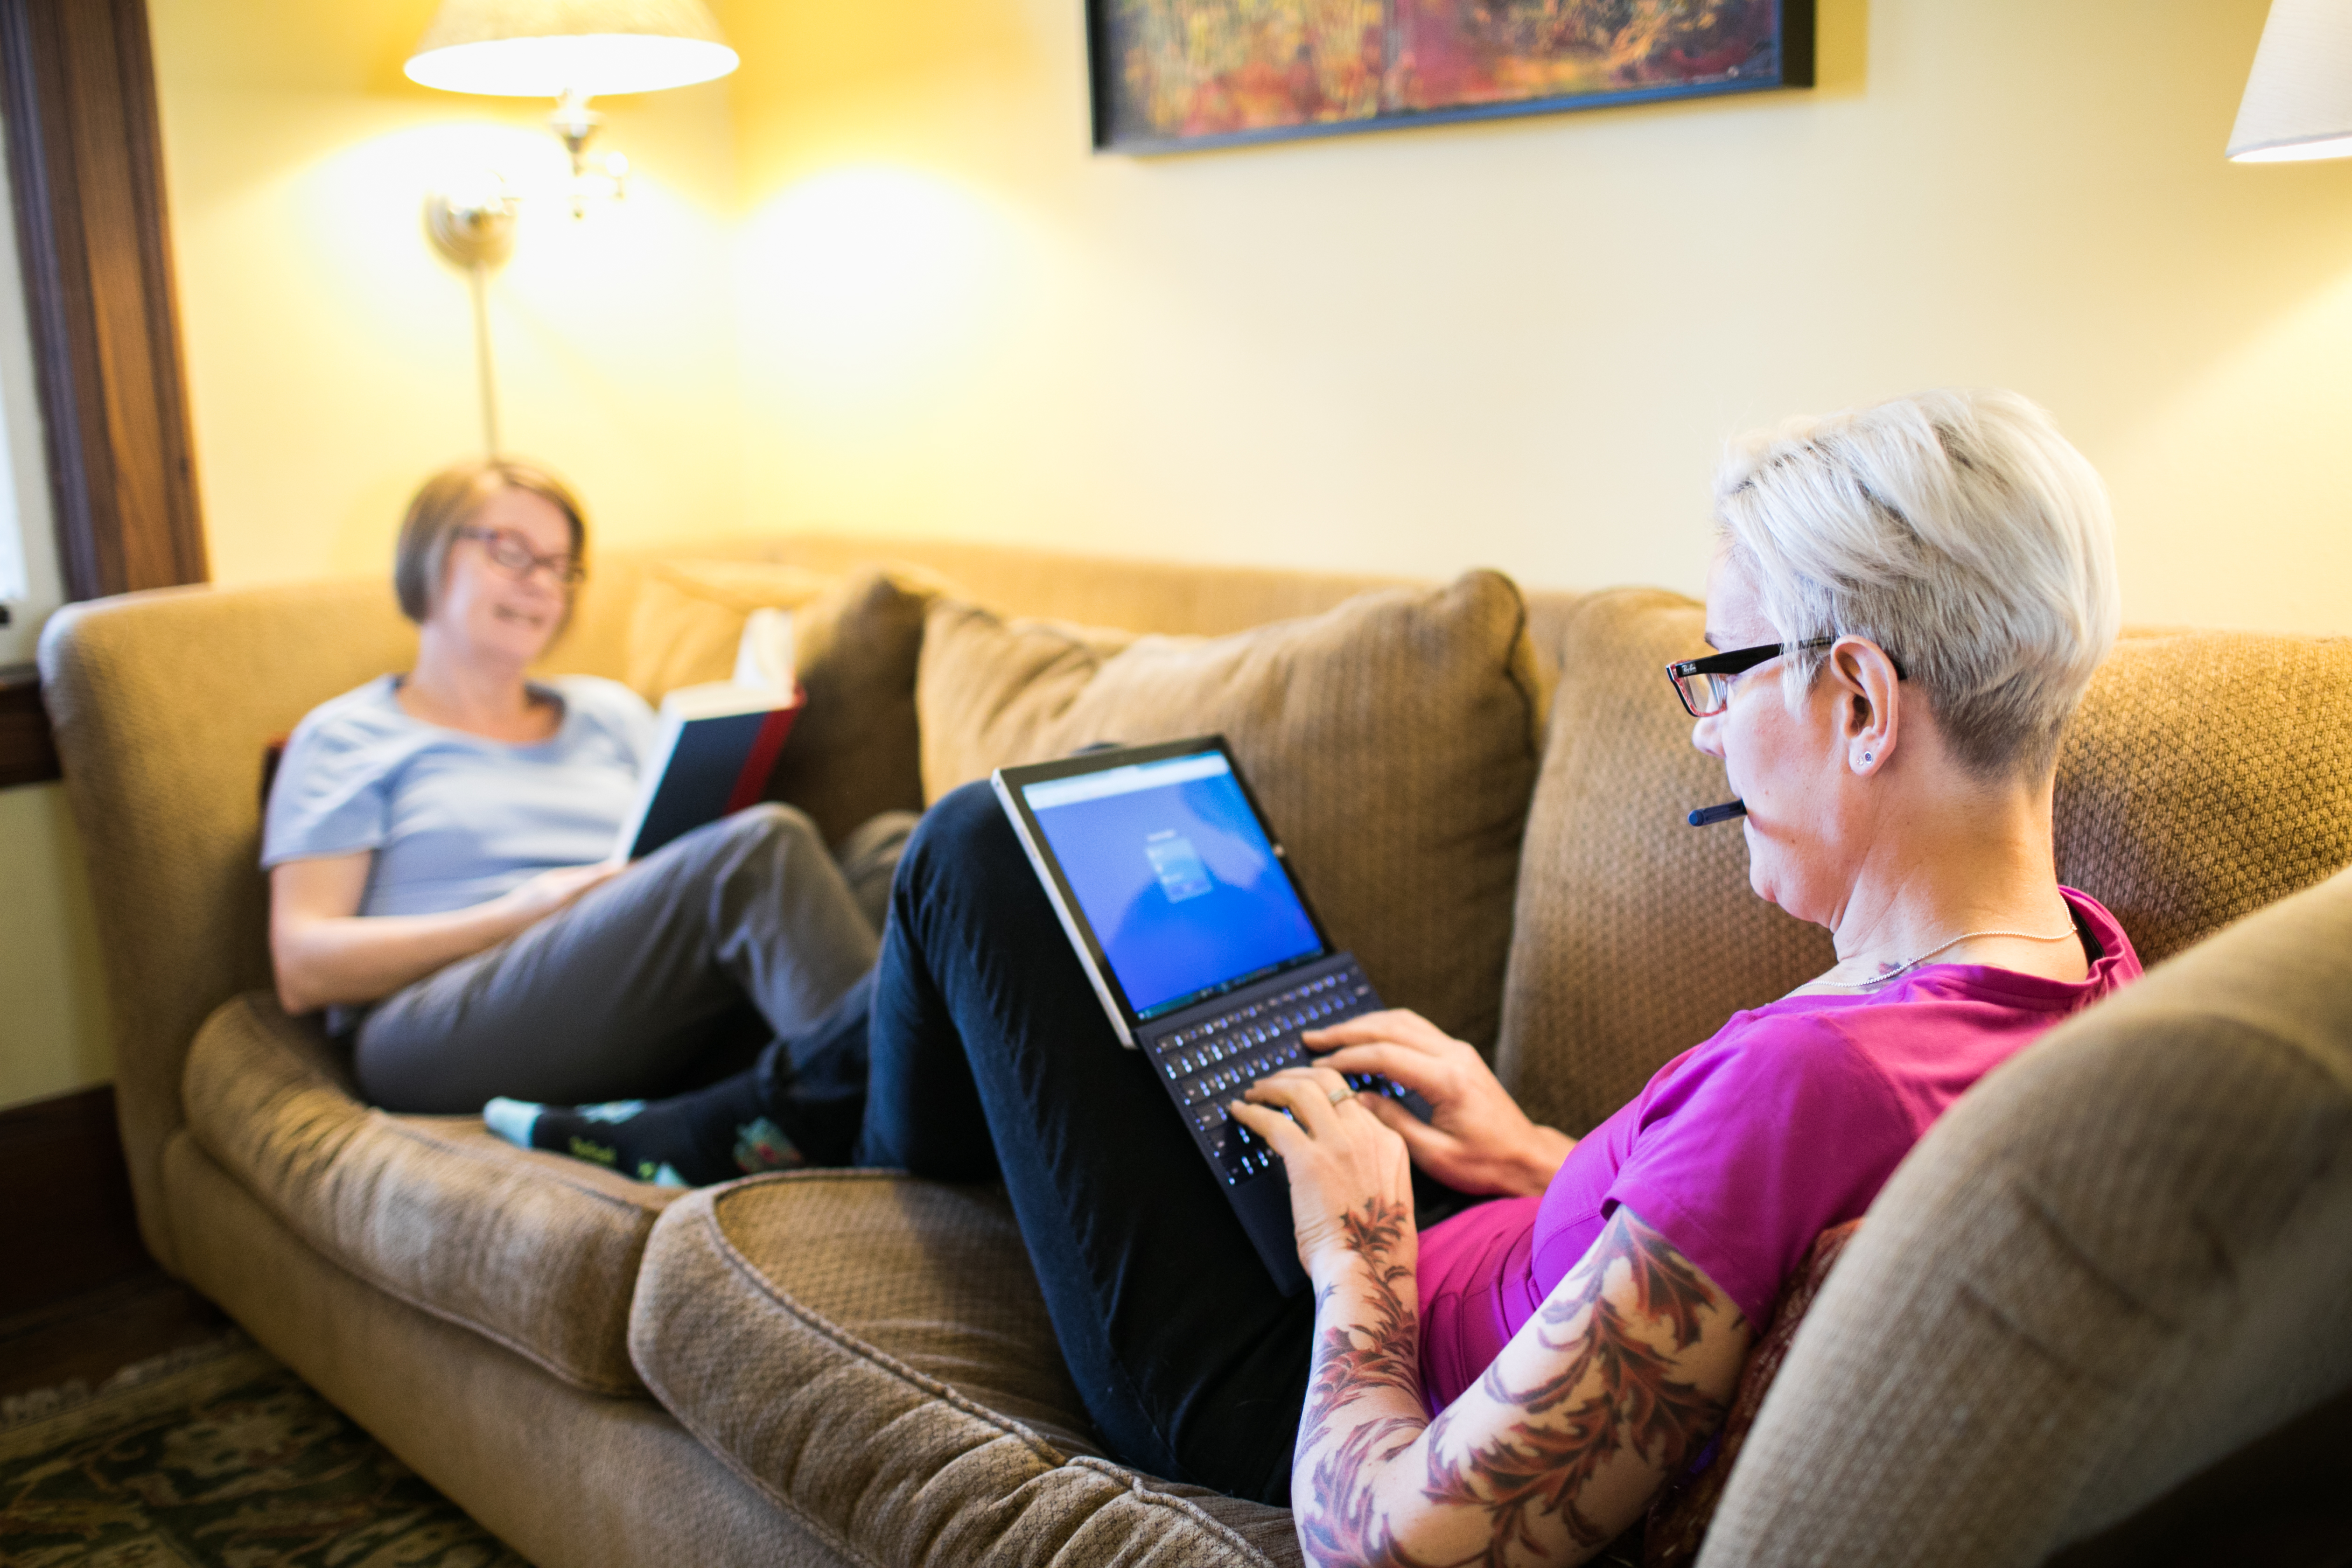 Two women sit on the couch while one reads a book and the other works on a laptop computer